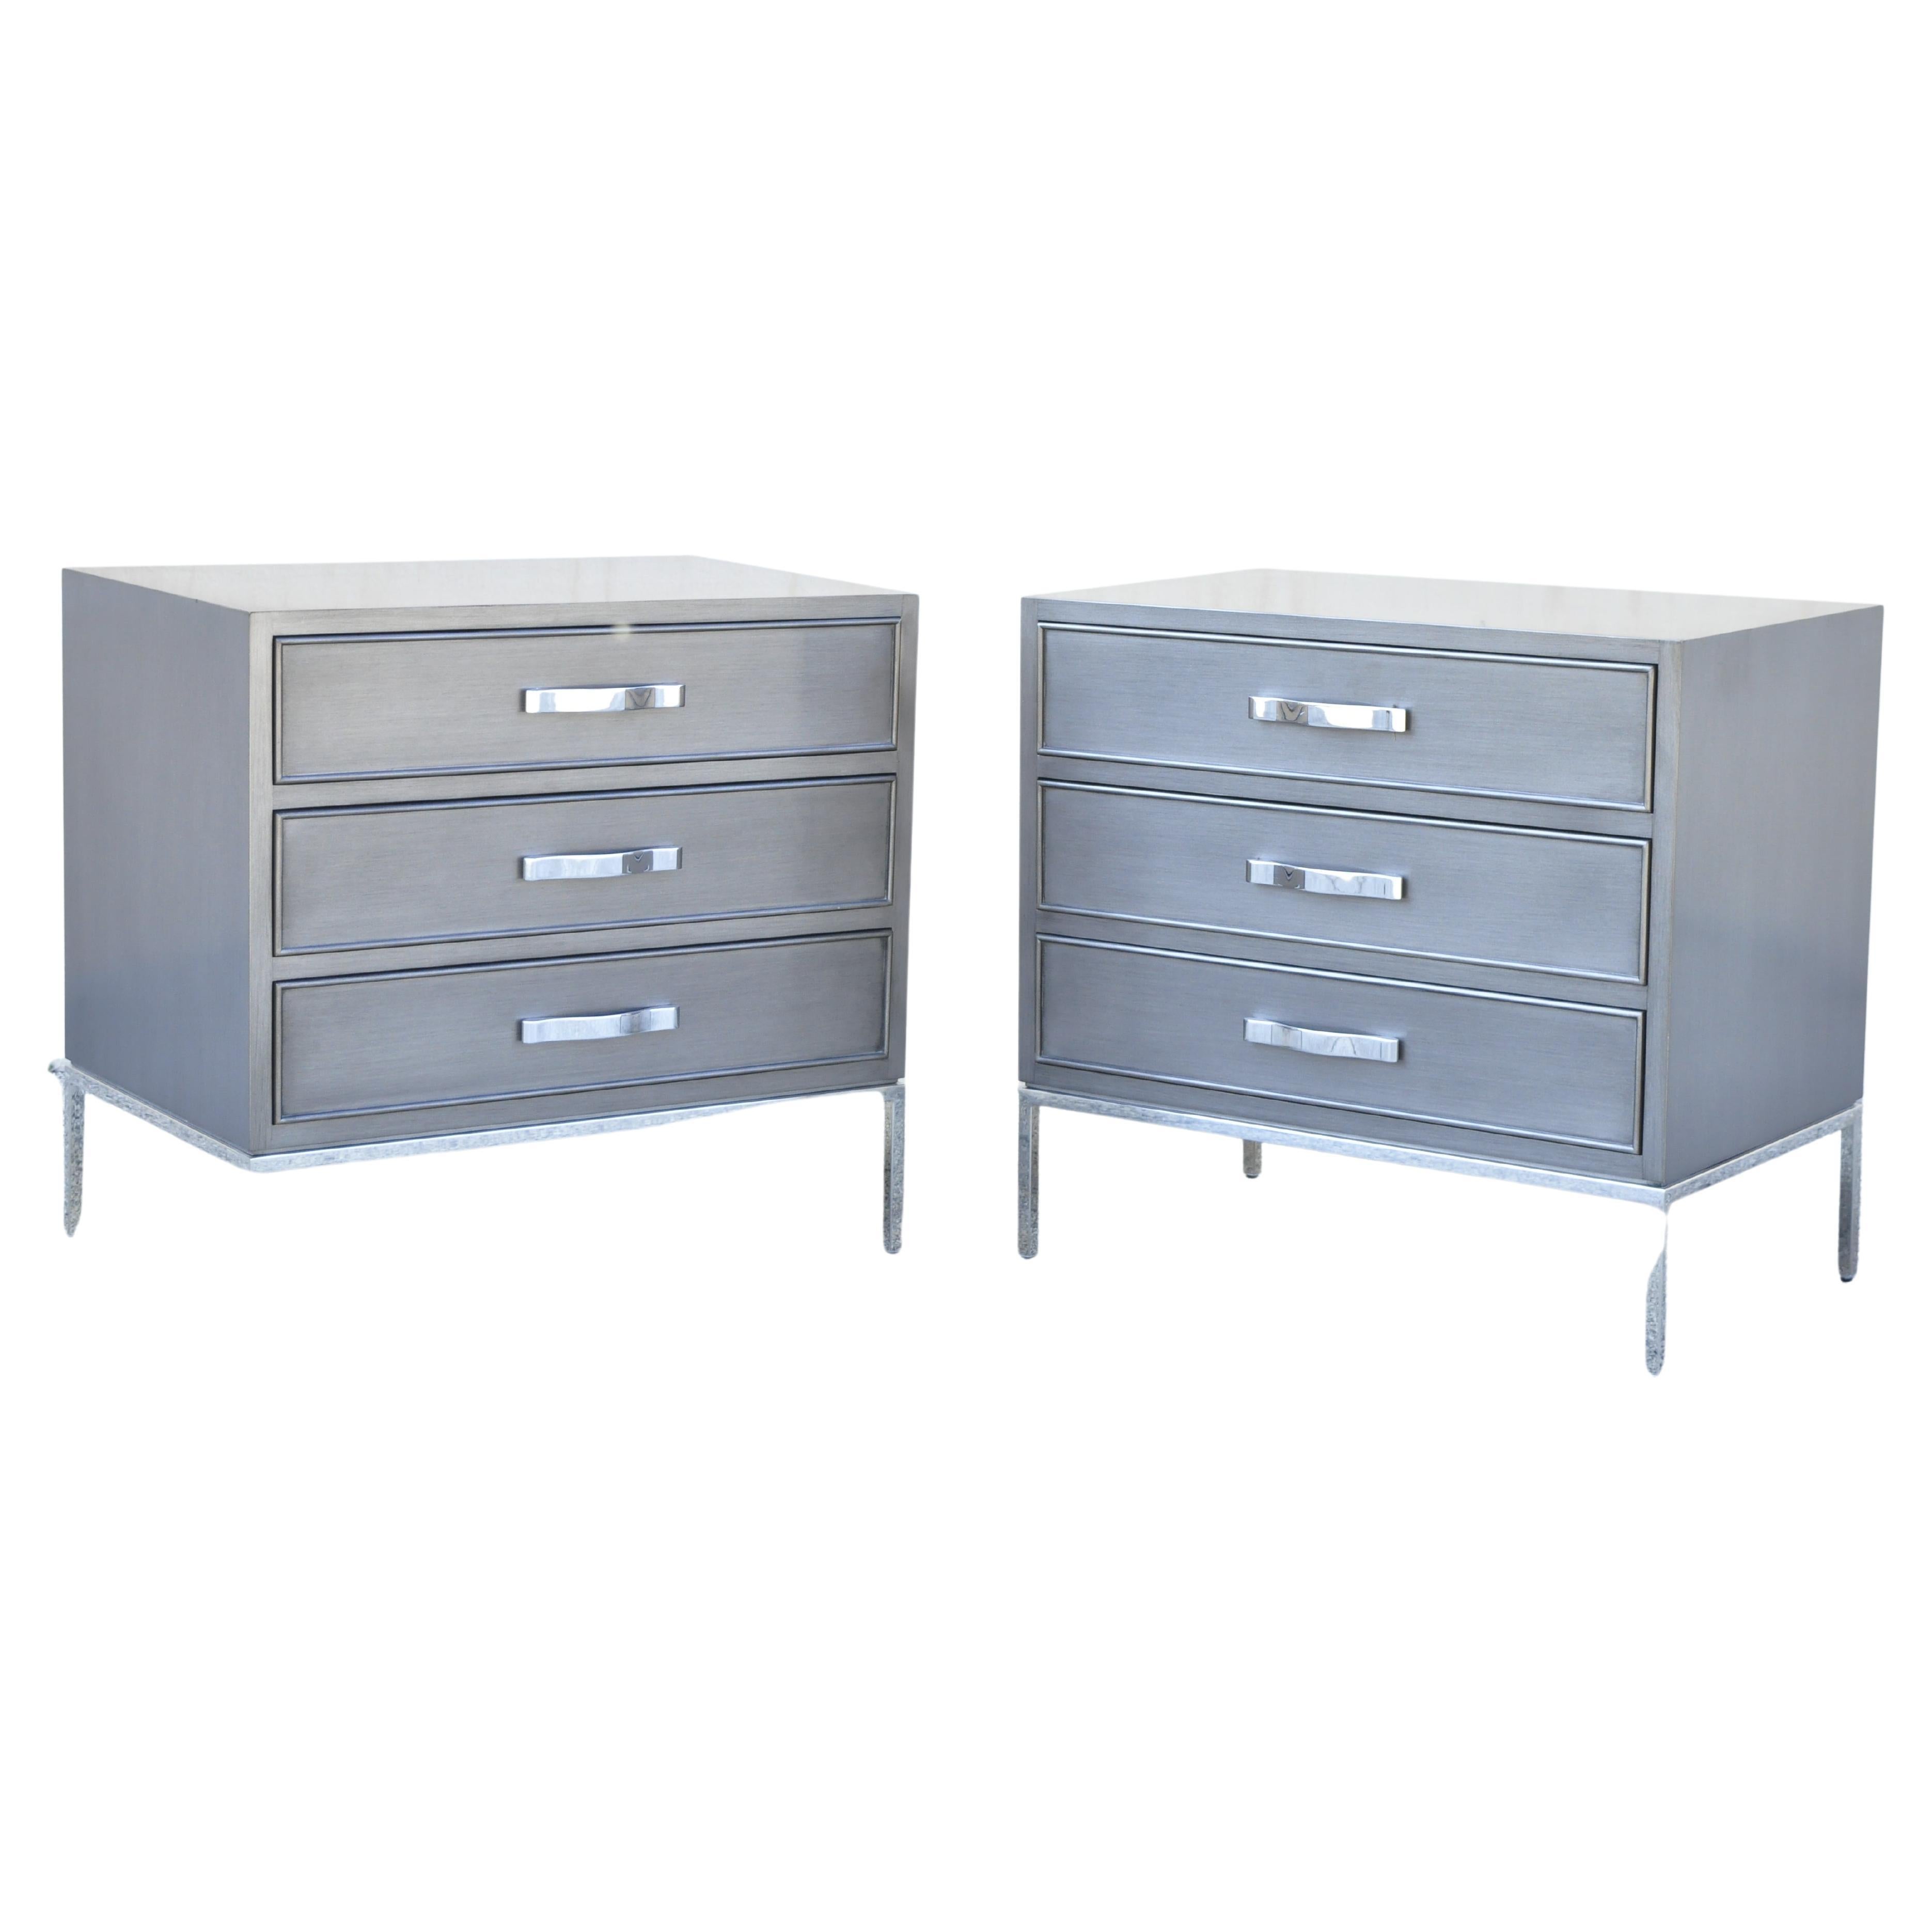 Swaim Furniture Gray Lacquer 3 Drawer Grant Chest Modern Nightstands - a Pair